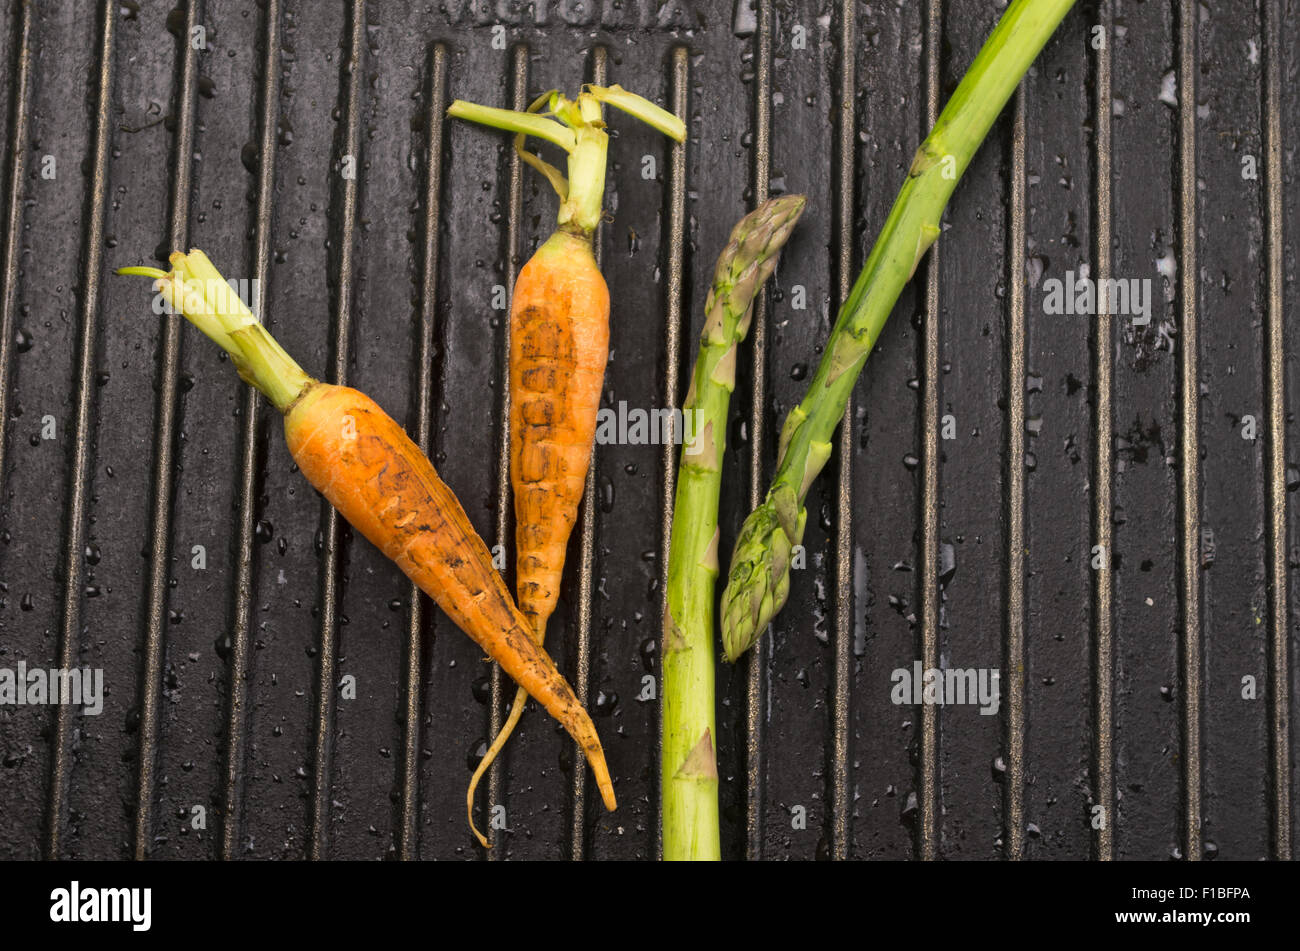 Carrot and asparagus on black metal Stock Photo